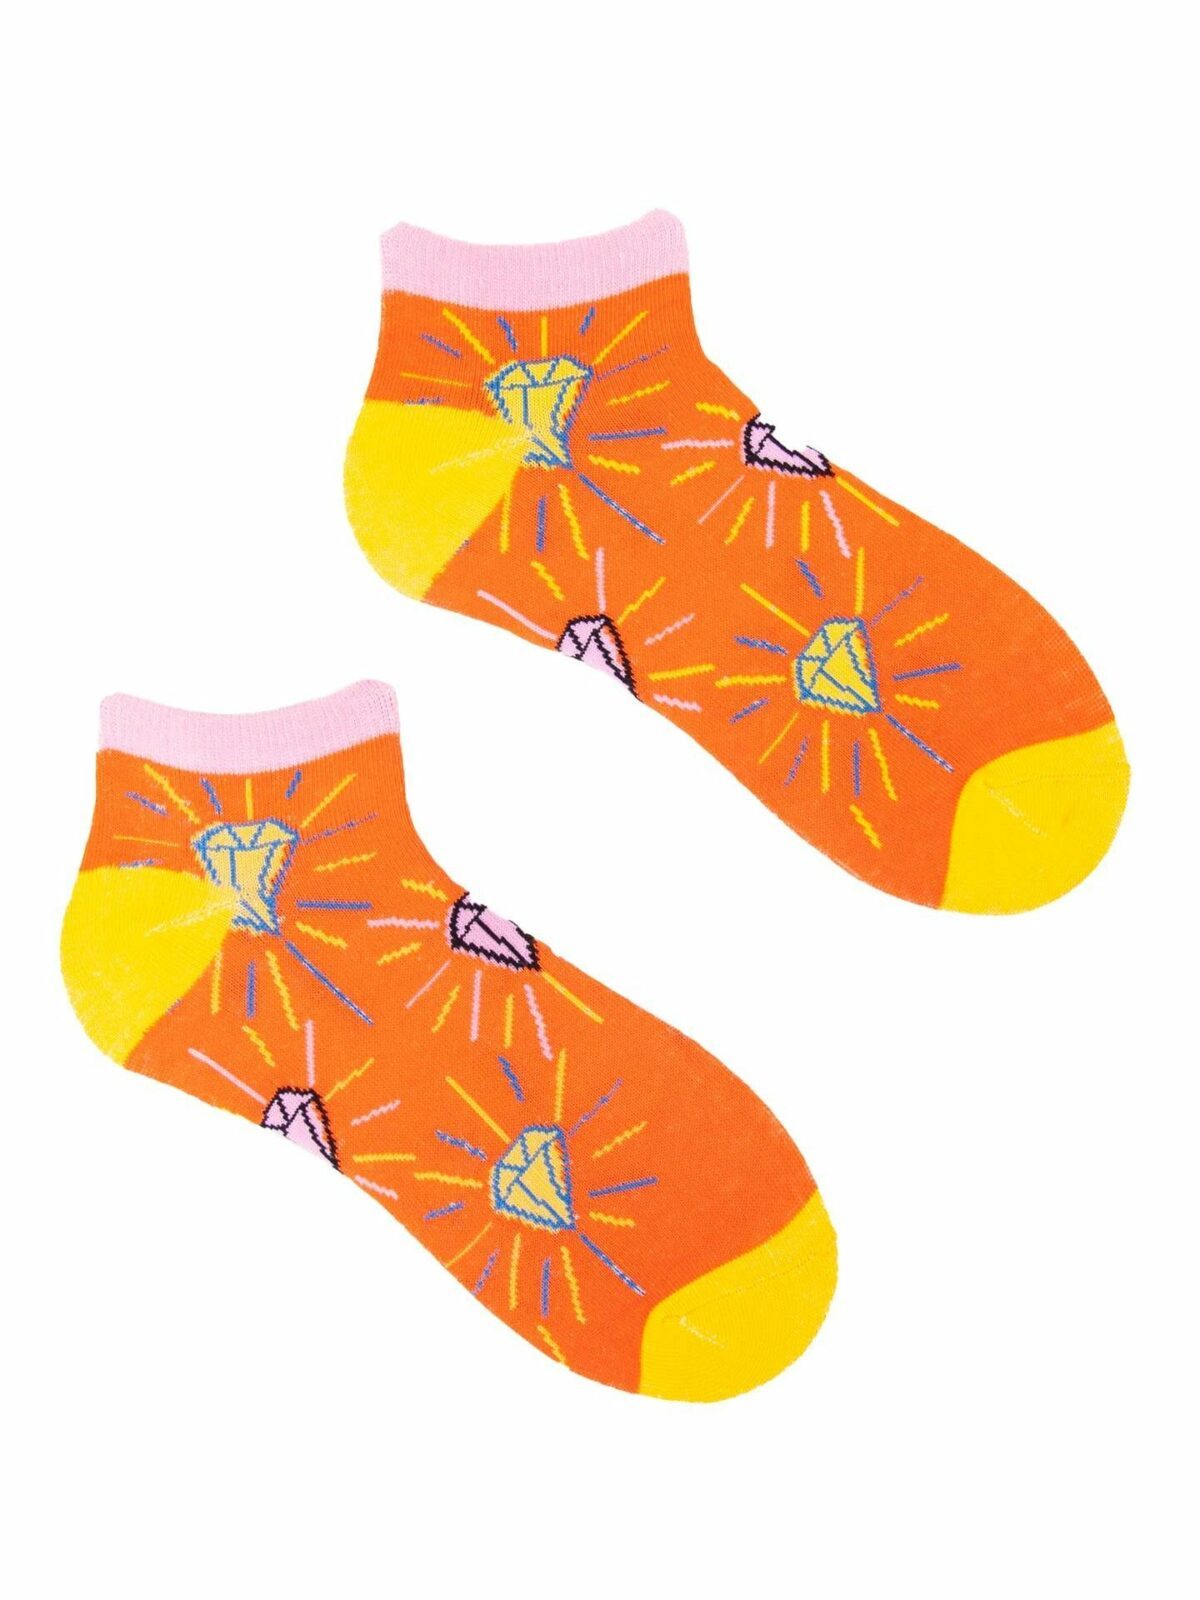 Yoclub Unisex's Ankle Funny Cotton Socks